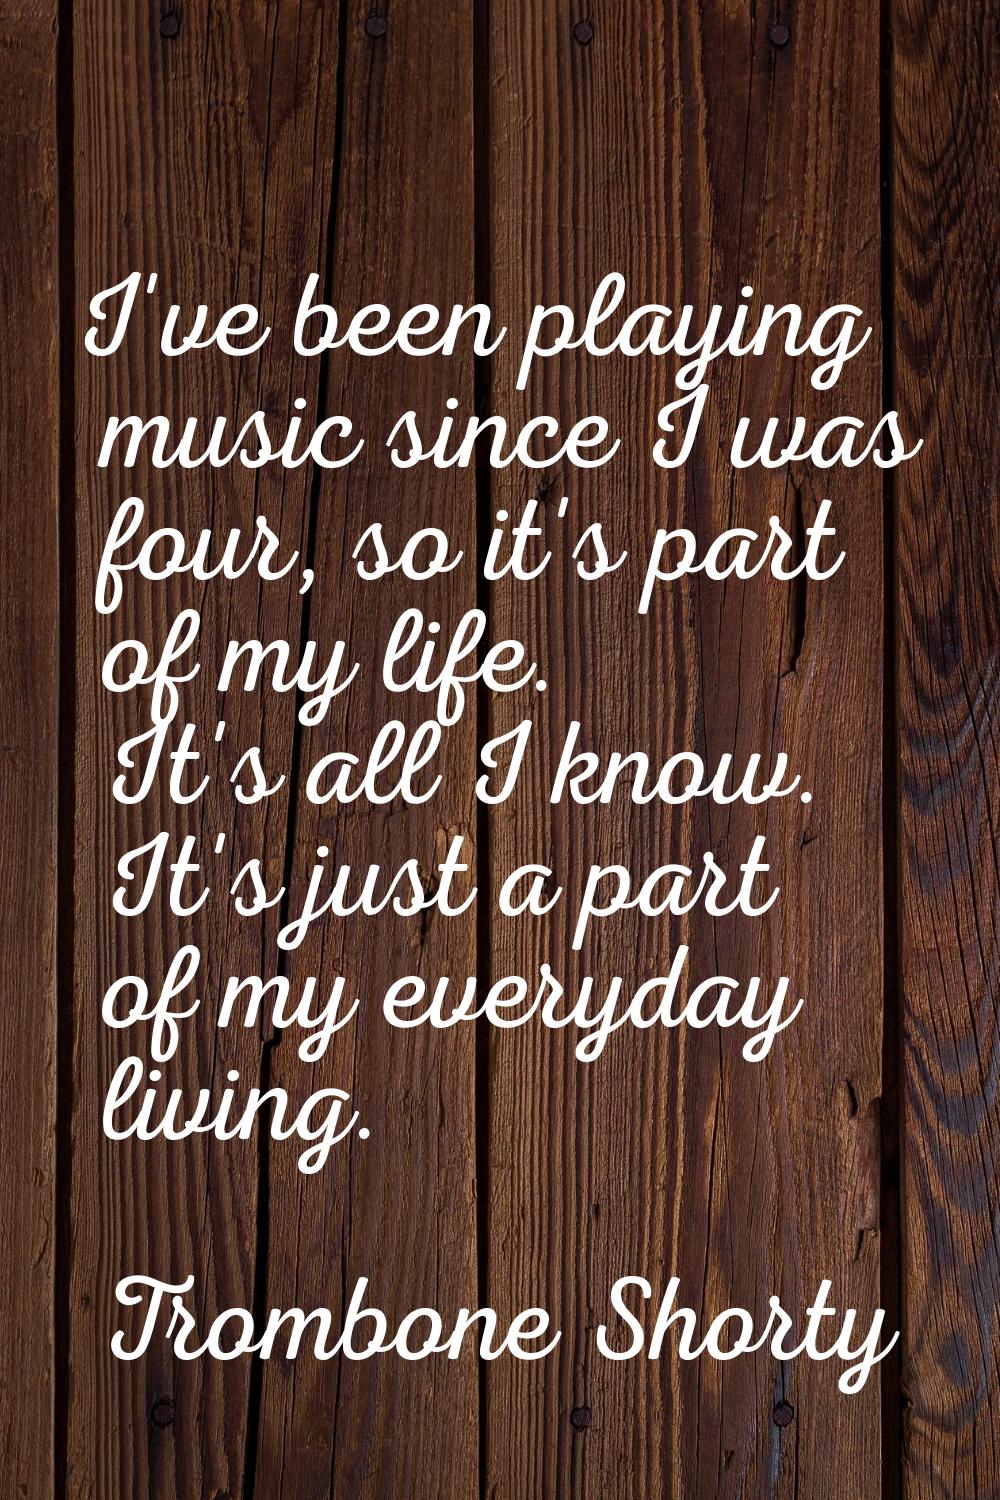 I've been playing music since I was four, so it's part of my life. It's all I know. It's just a par